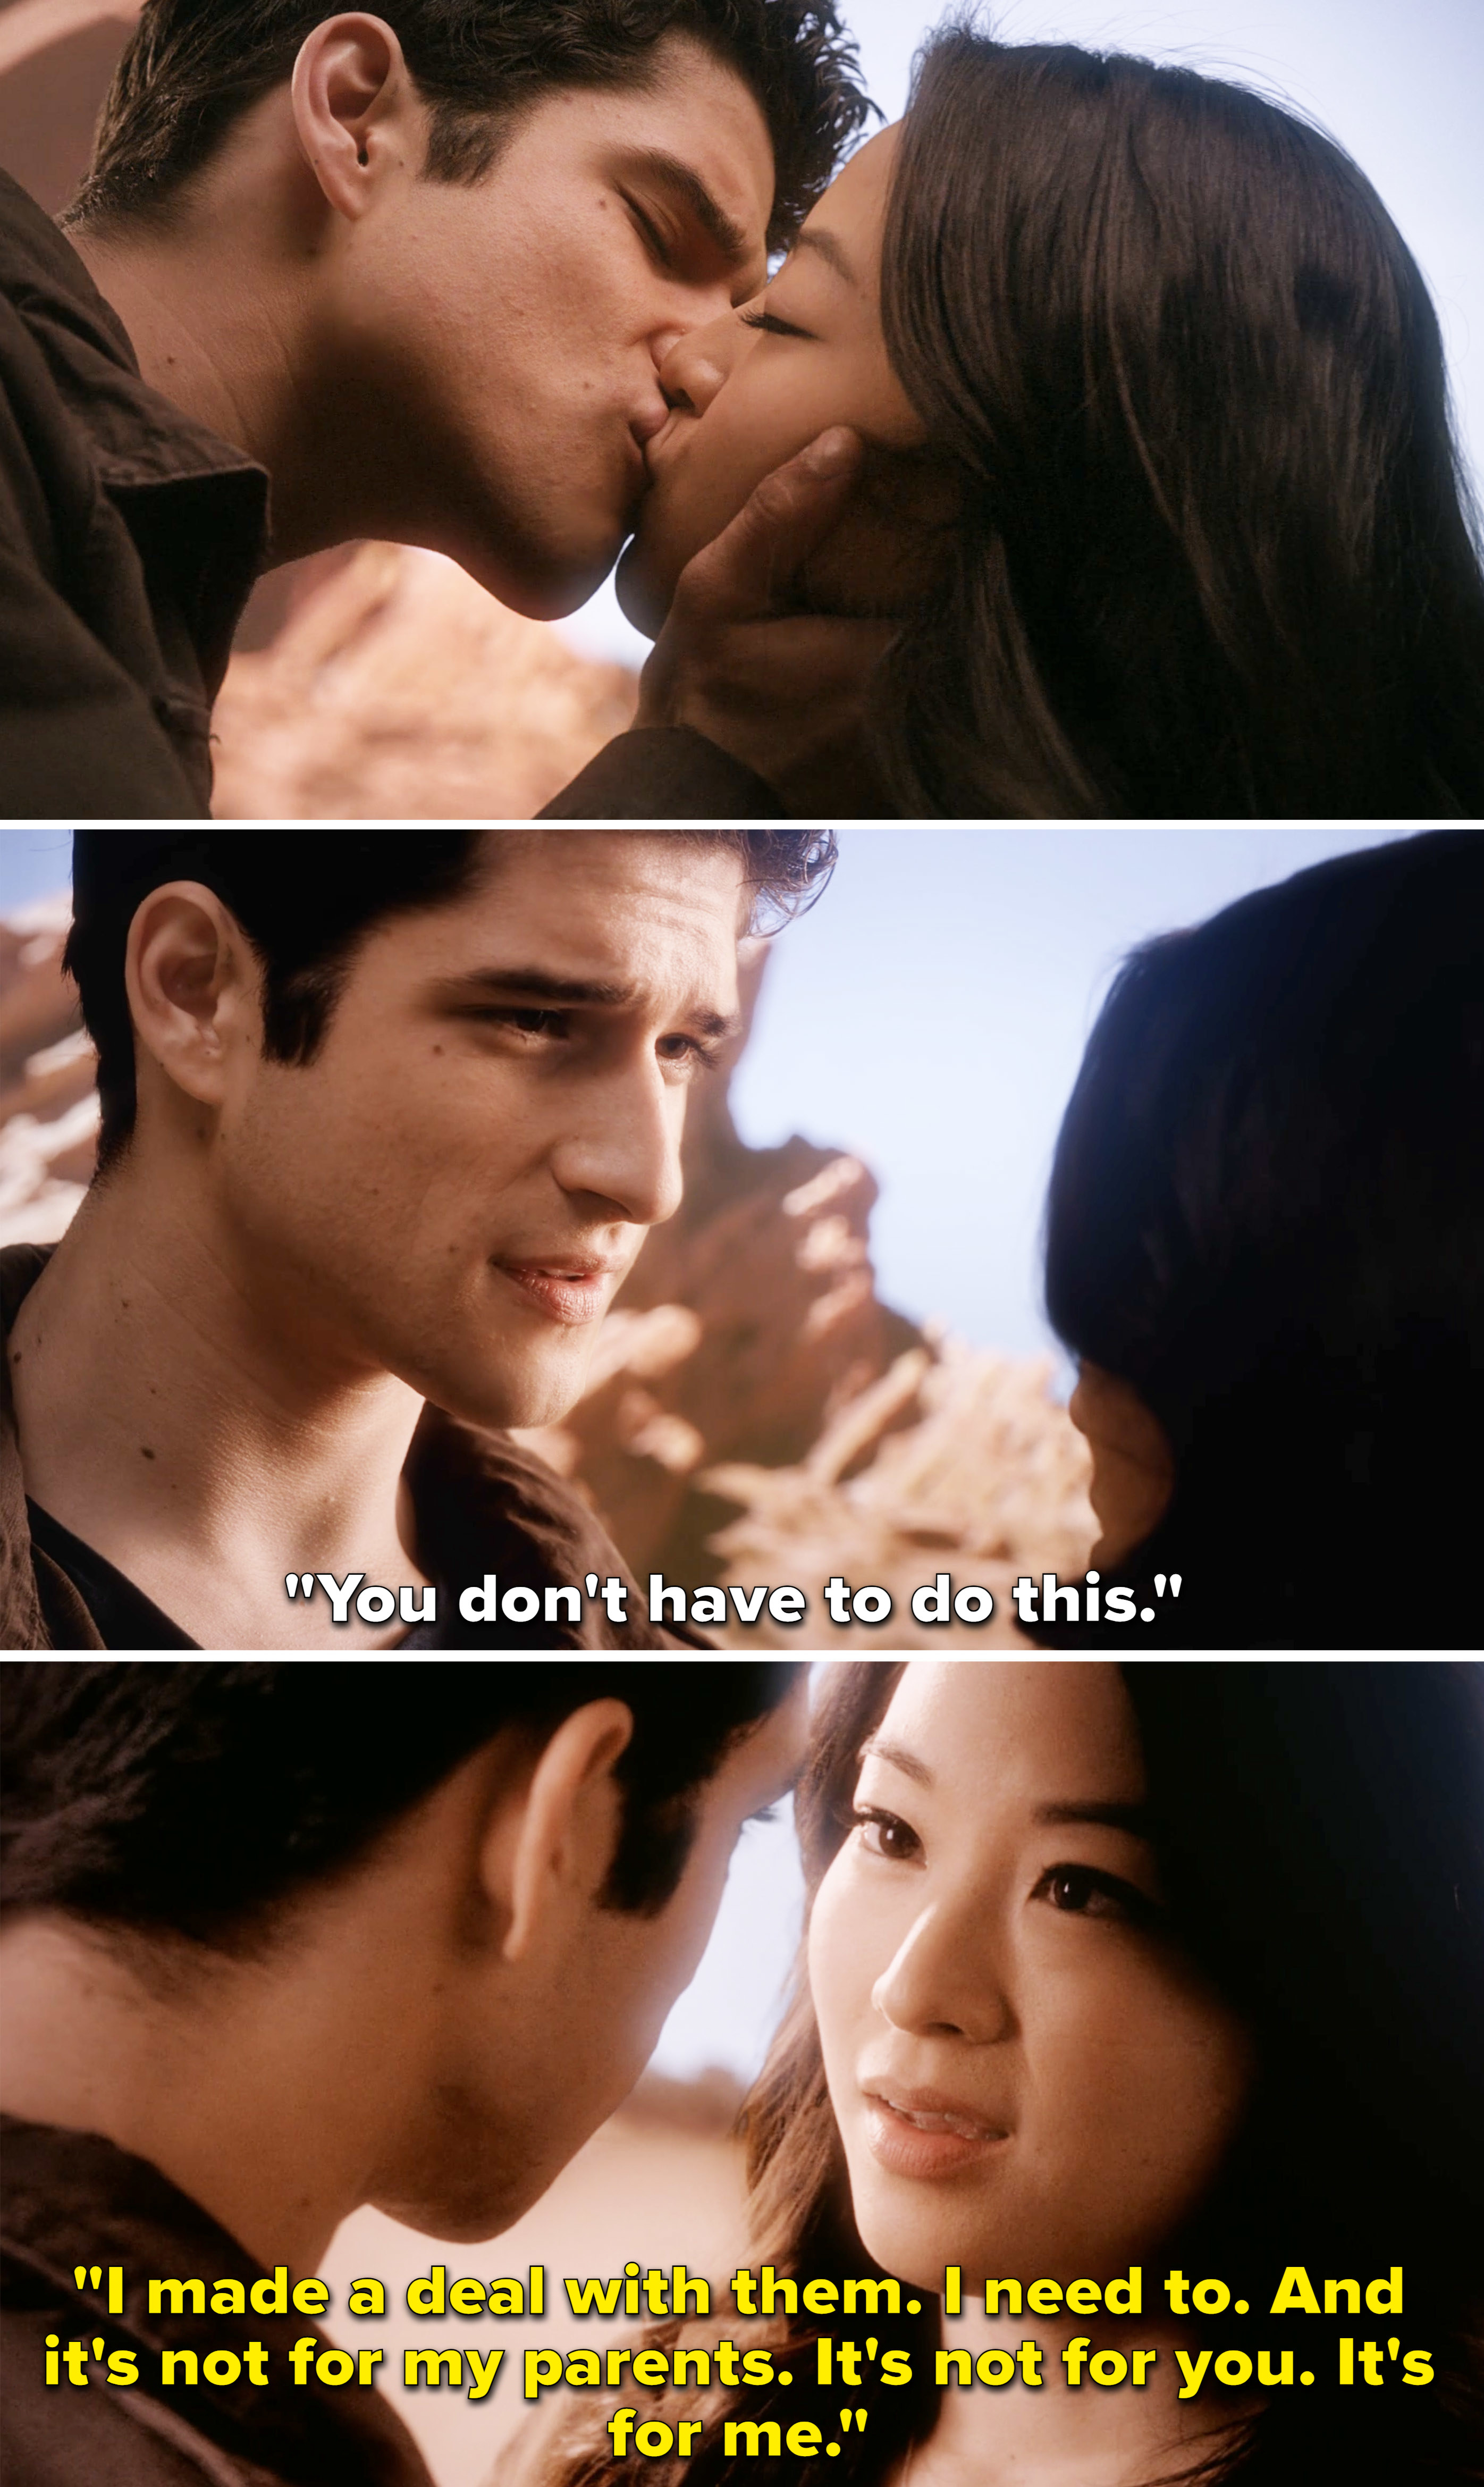 Kira telling Scott, &quot;I made a deal with them. I need to. And it&#x27;s not for my parents. It&#x27;s not for you. It&#x27;s for me&quot;